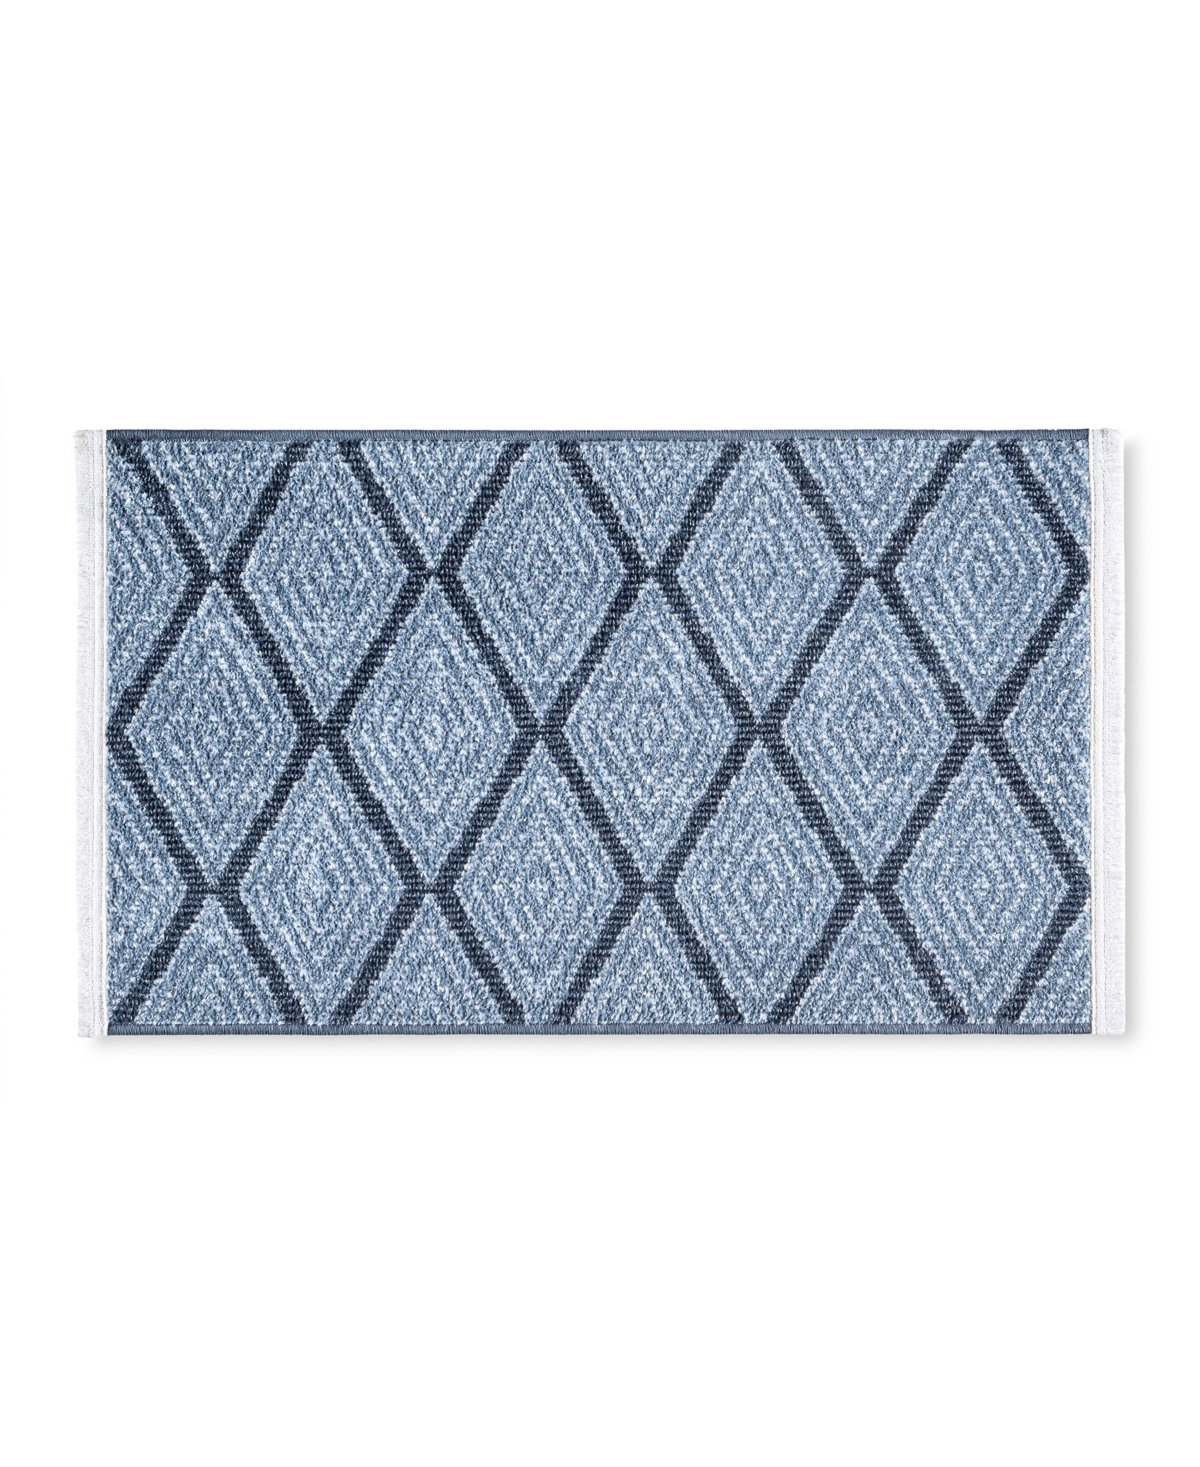 Town & Country Living Everyday Rein Everwash 87 1'9" X 2'11" Area Rug In Blue